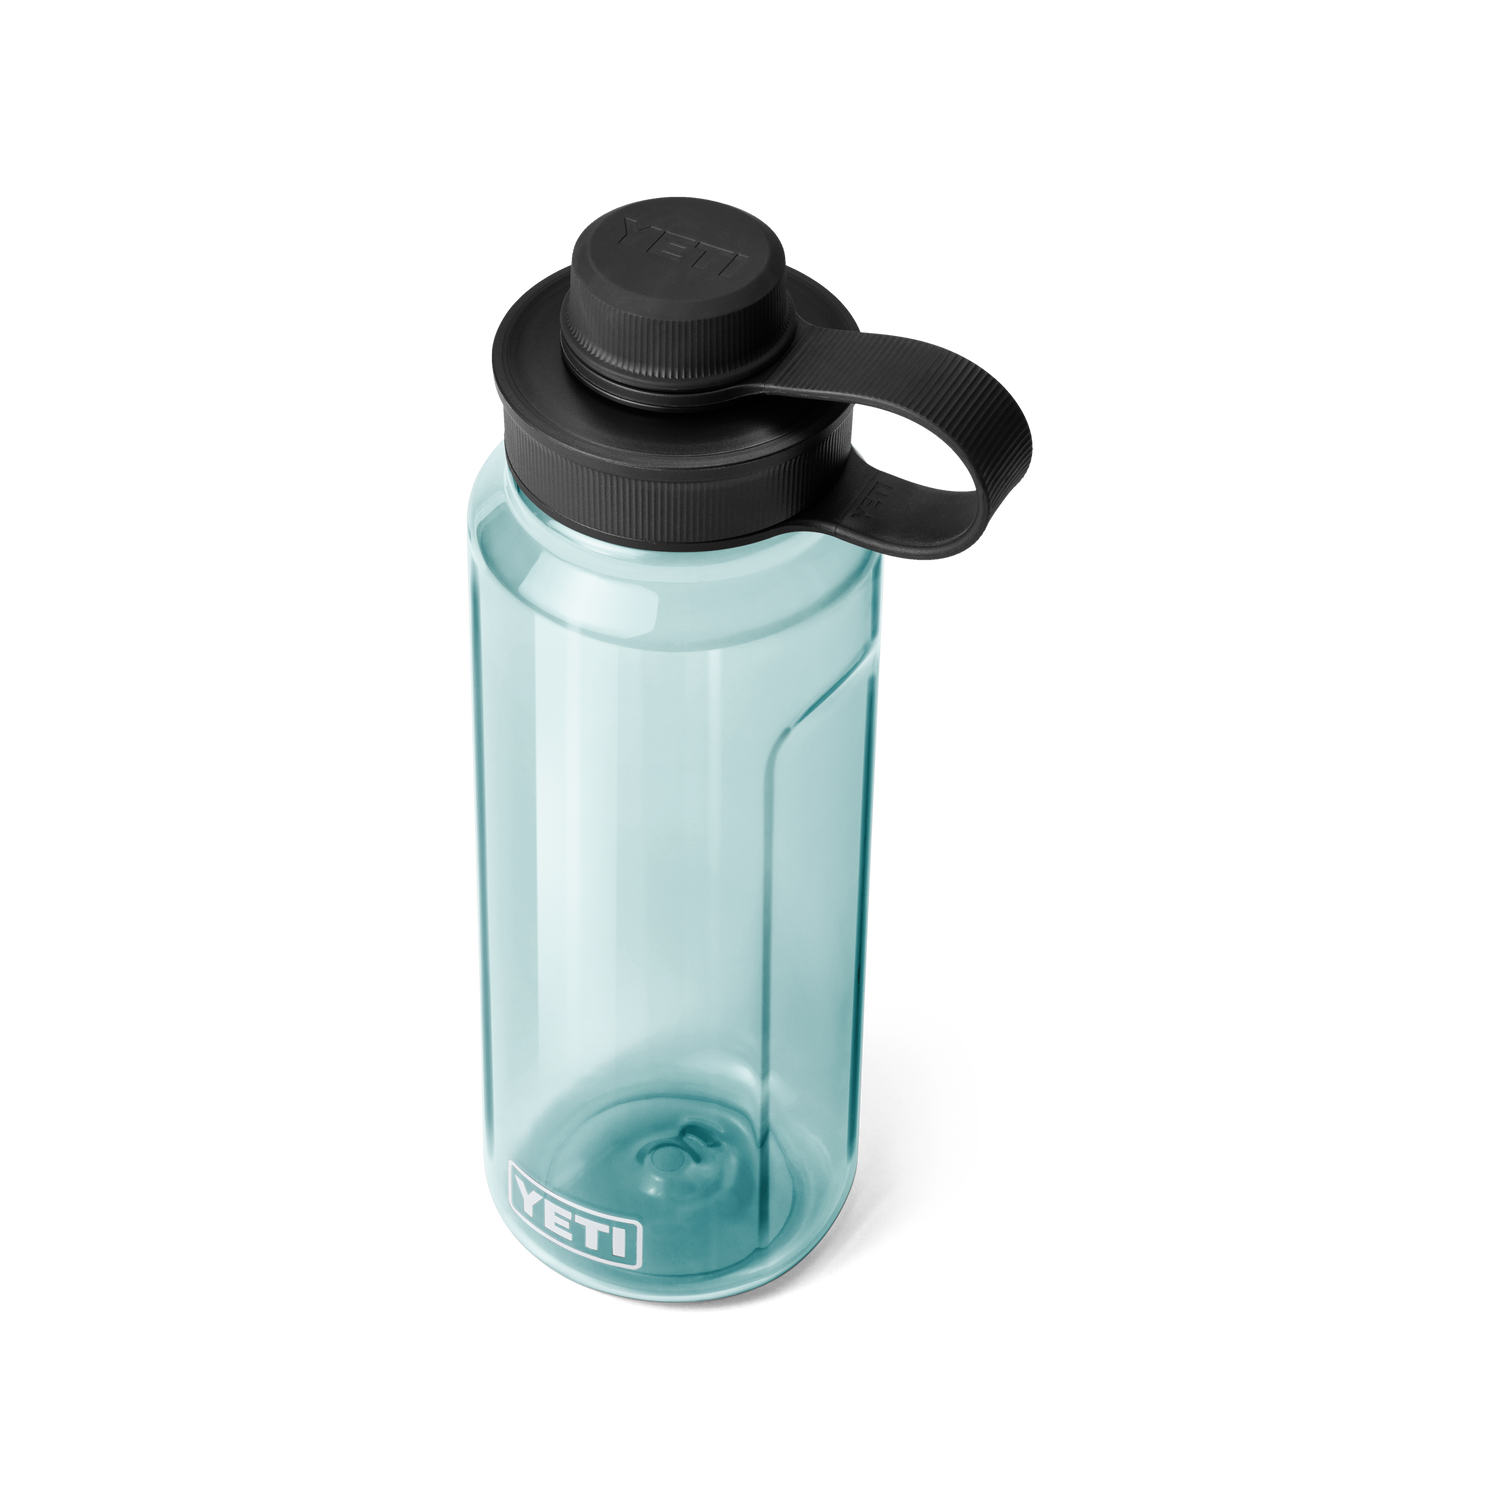 site_studio_Drinkware_Yonder_Tether_Accs_1L_Seafoam_3qtr_Closed_0818_Primary_B_2400x2400.png